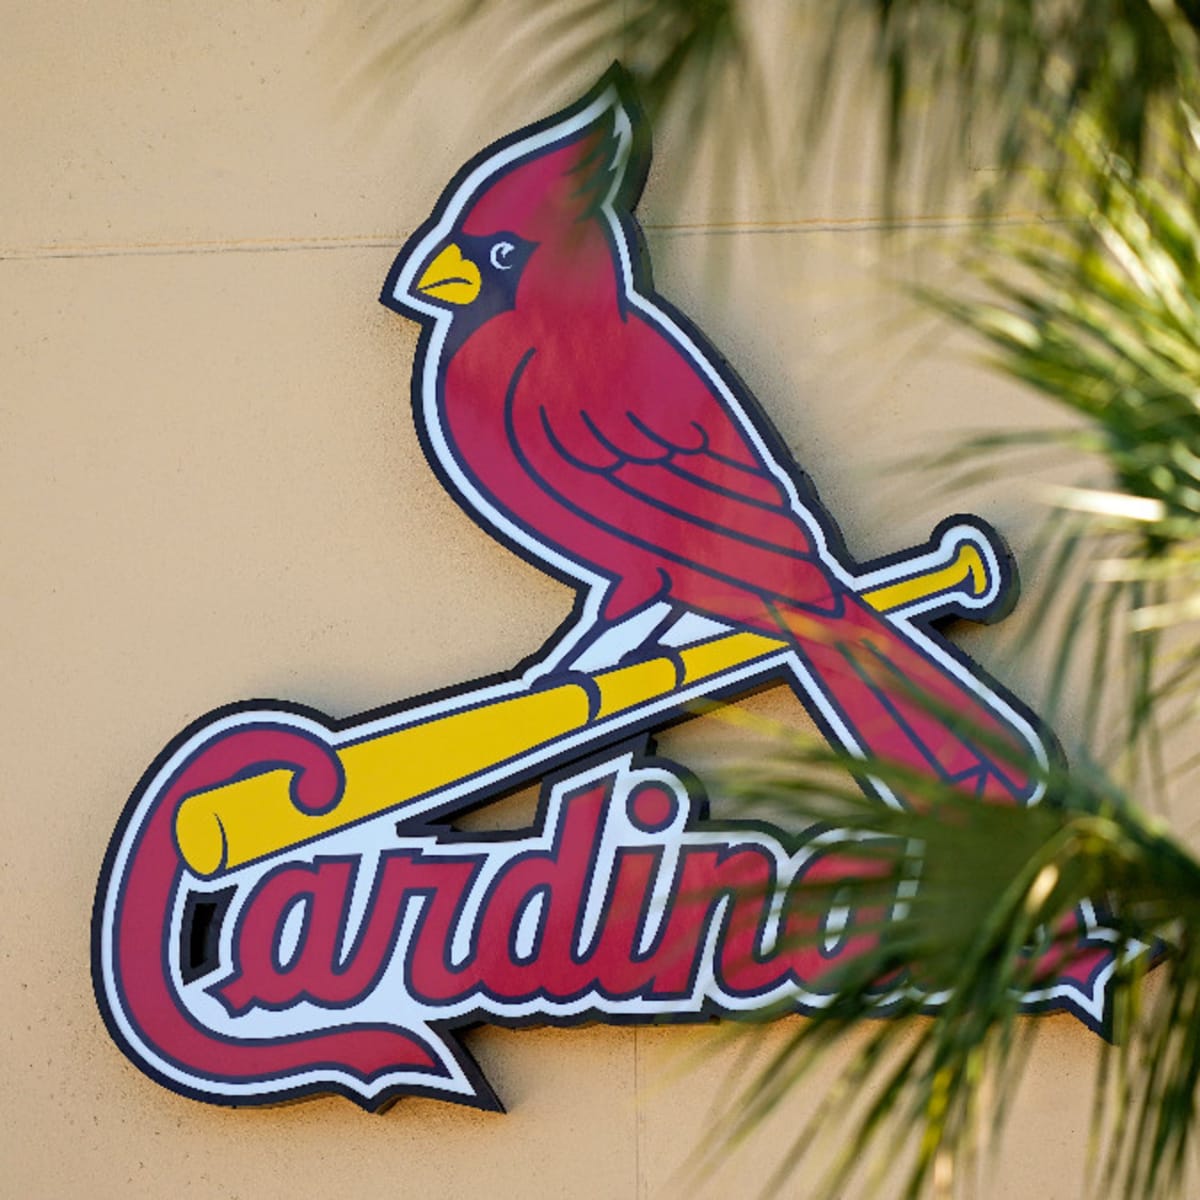 Surviving 'the grind': Cardinals' plans to weather rigorous schedule  'reveal a better team